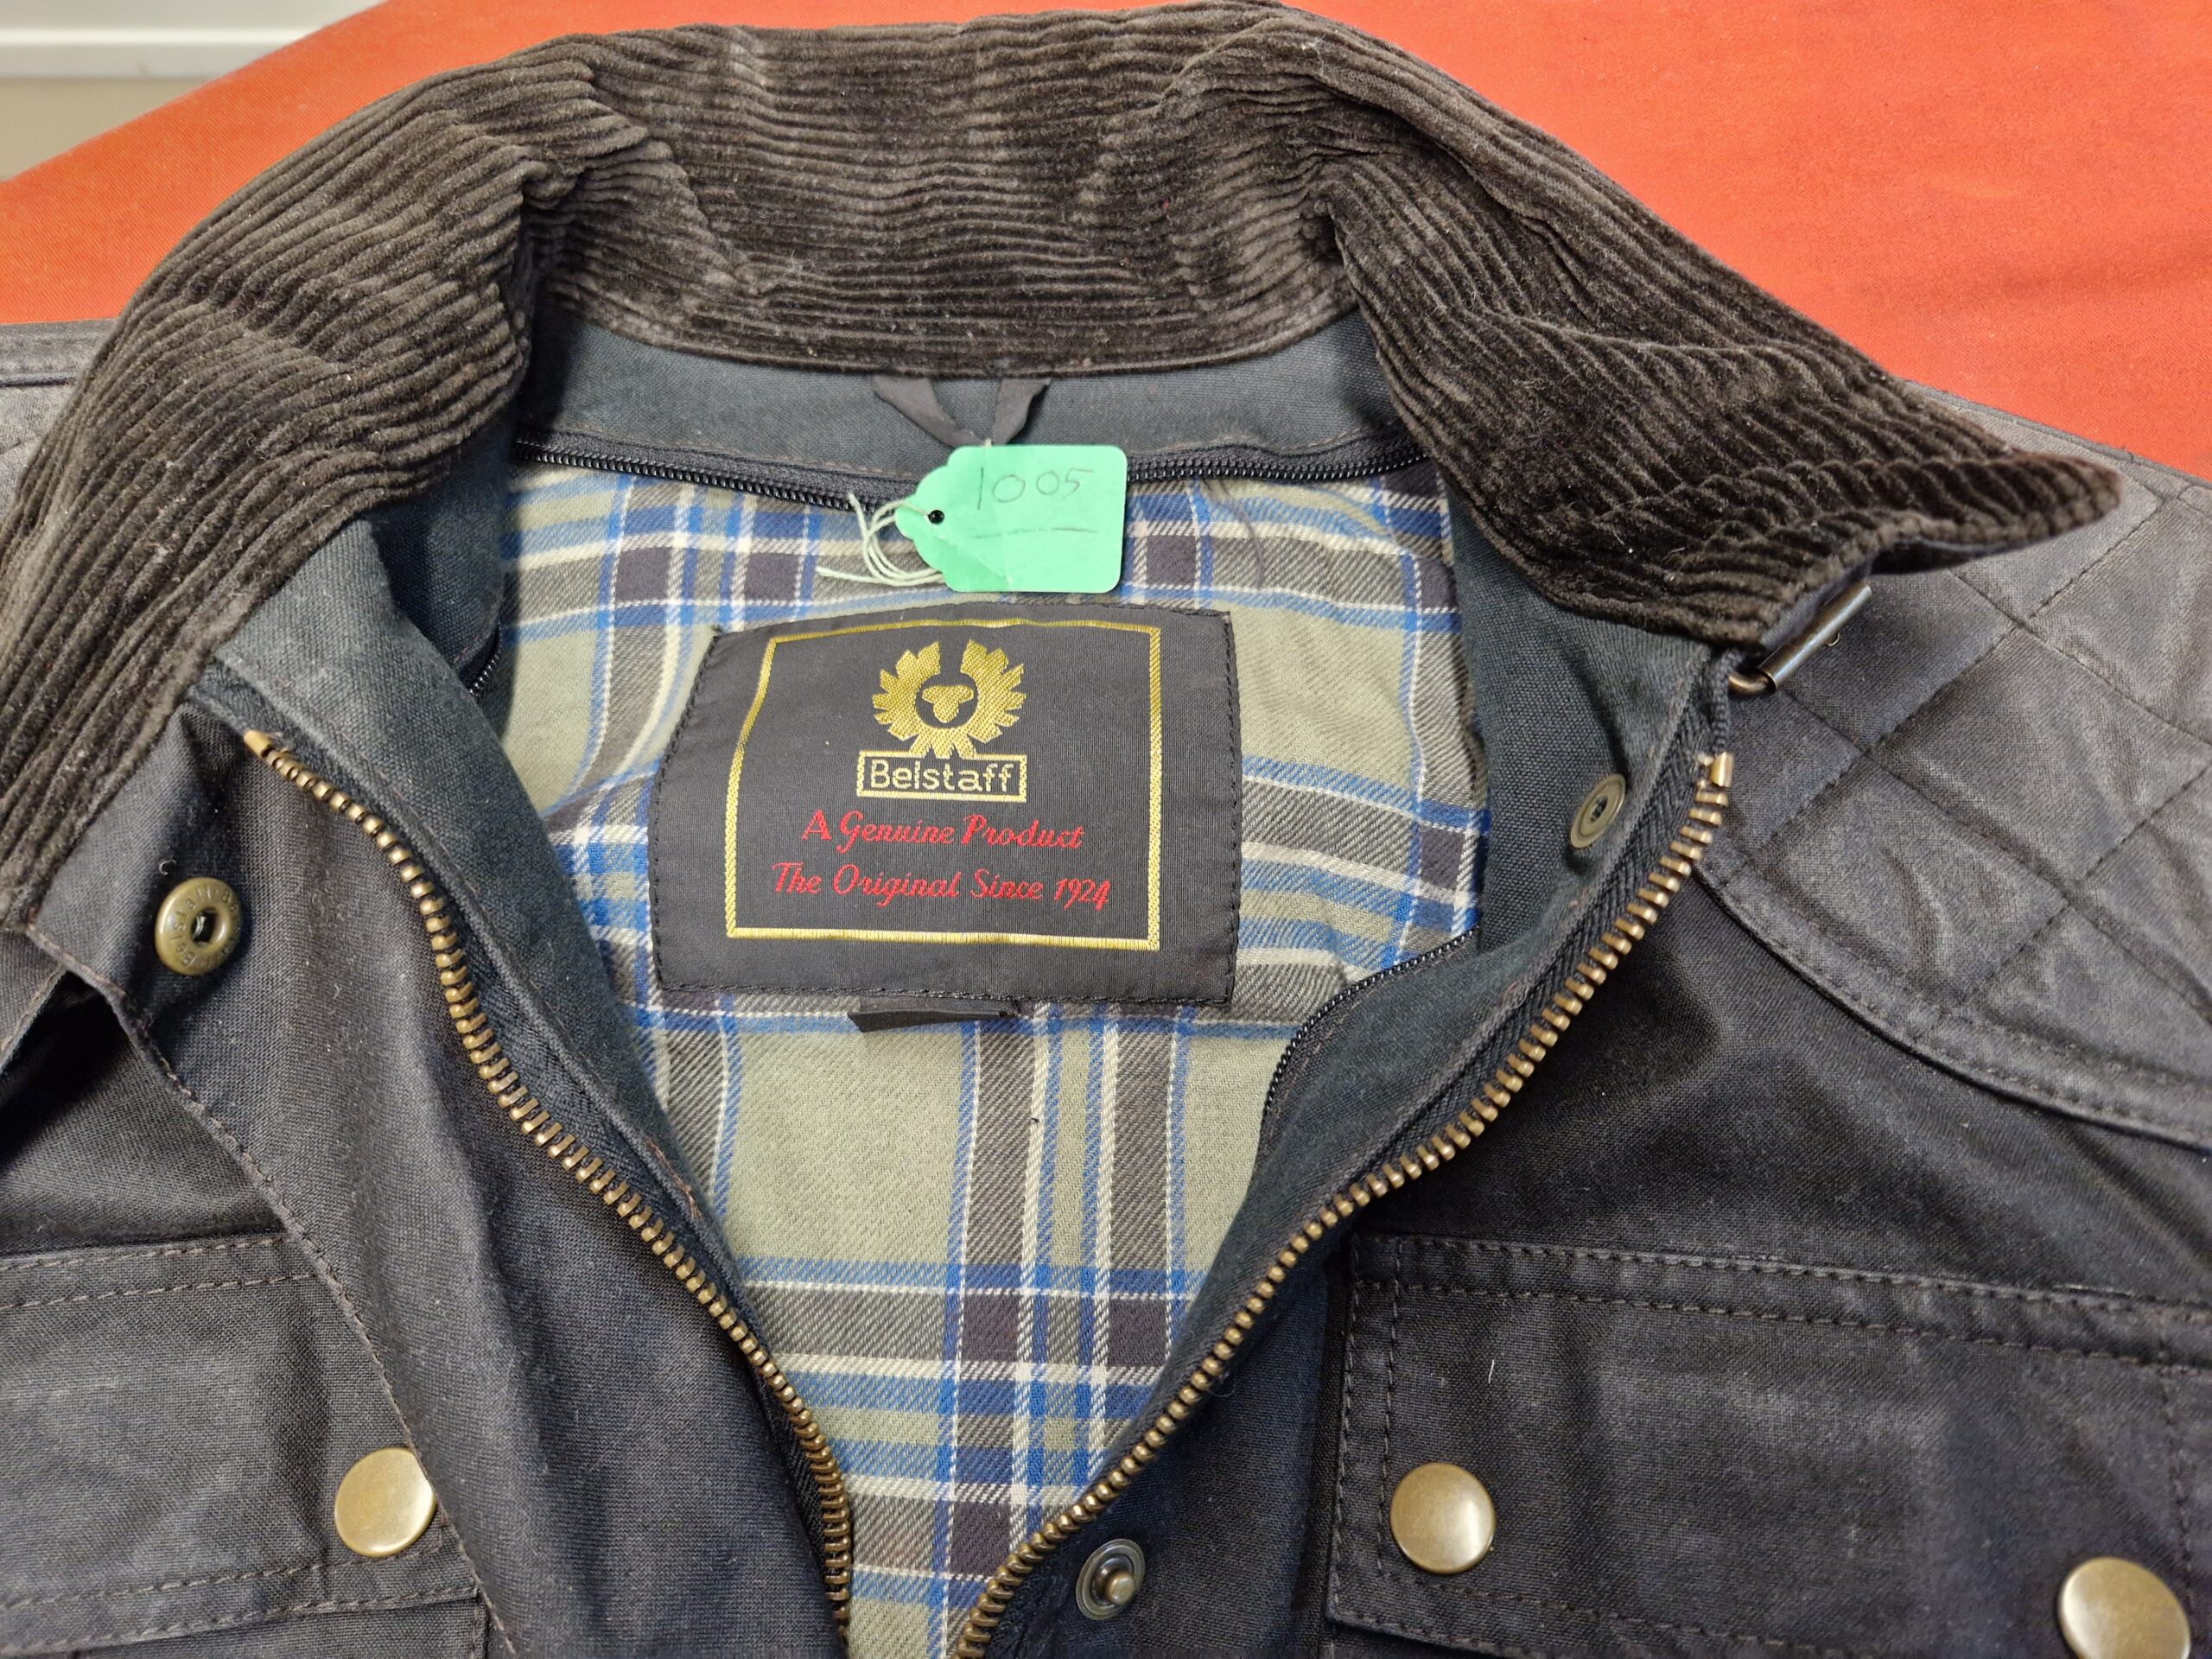 Wax Jacket Repairs or Alterations - Wax Jackets Cleaned